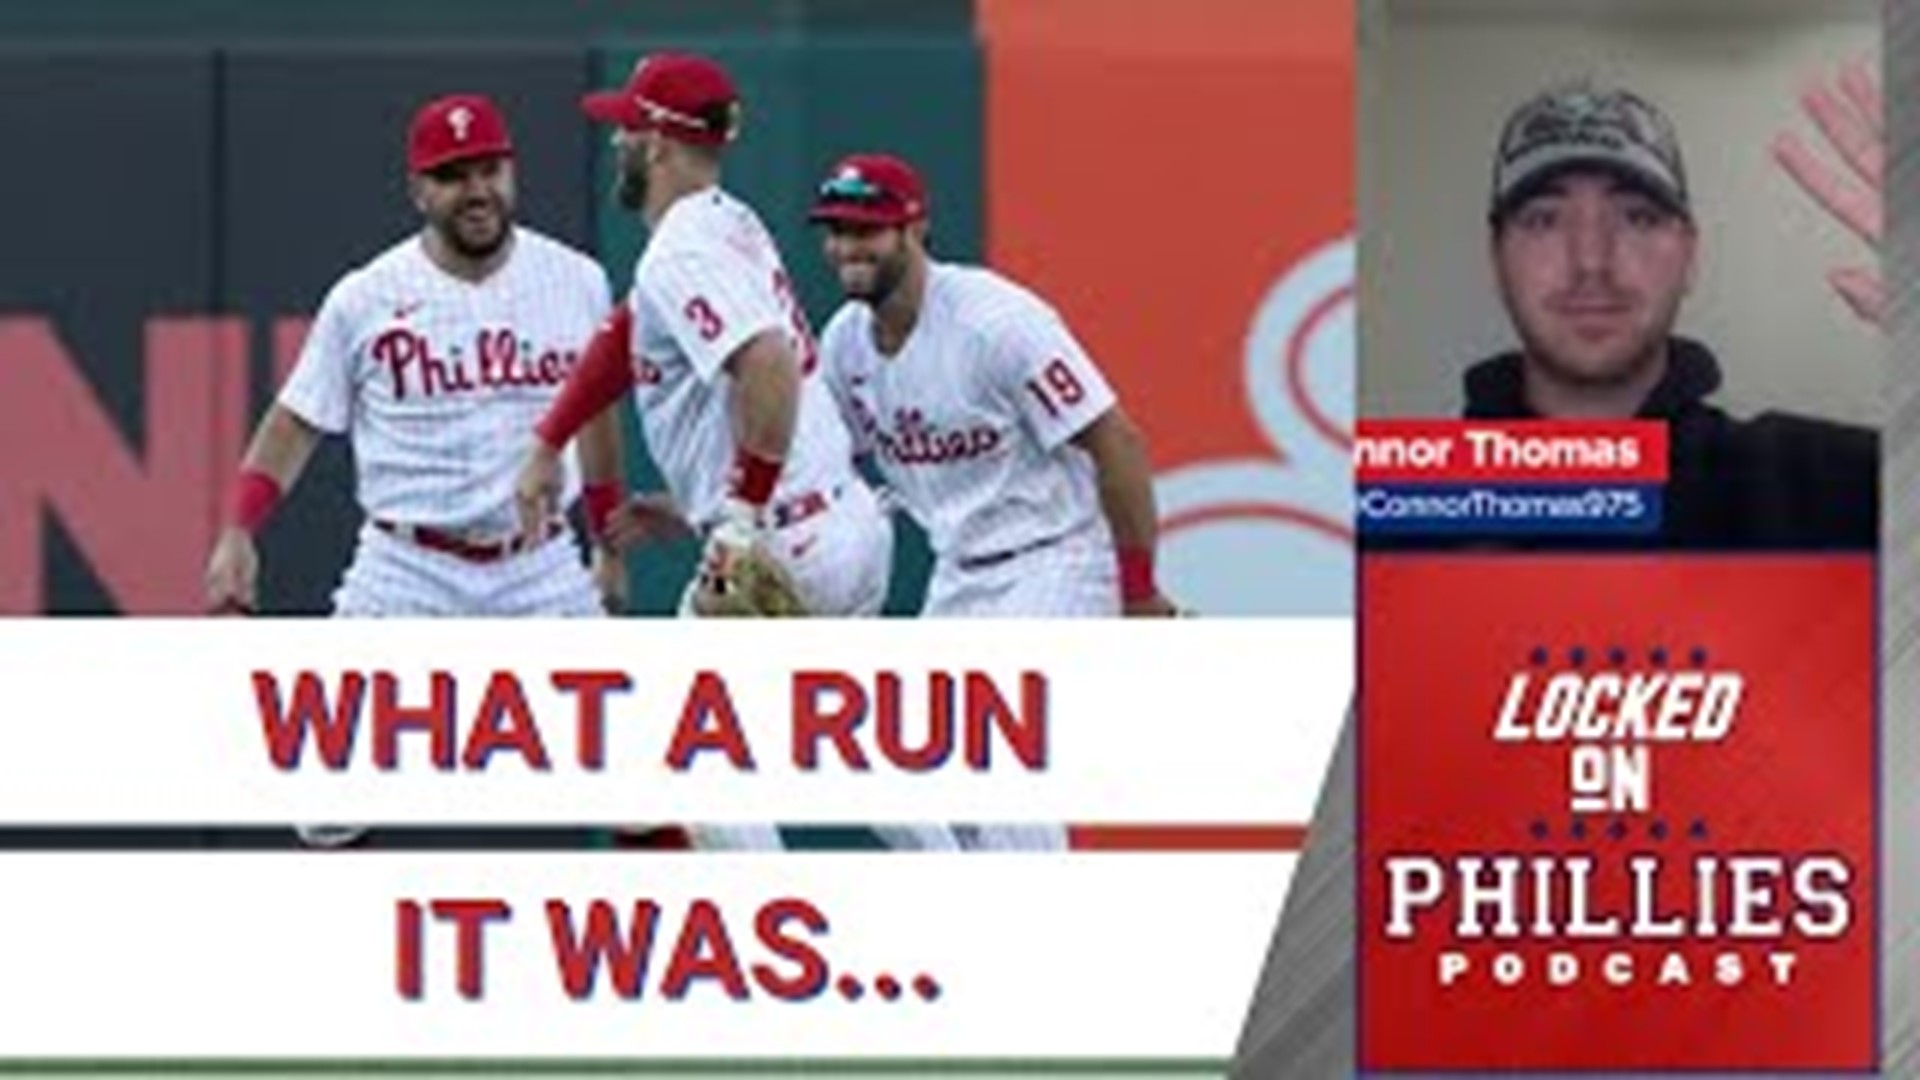 In today's episode, Connor recaps the end of the 2022 World Series as the Philadelphia Phillies fall in Game 6 to the Houston Astros, ending their magical run.